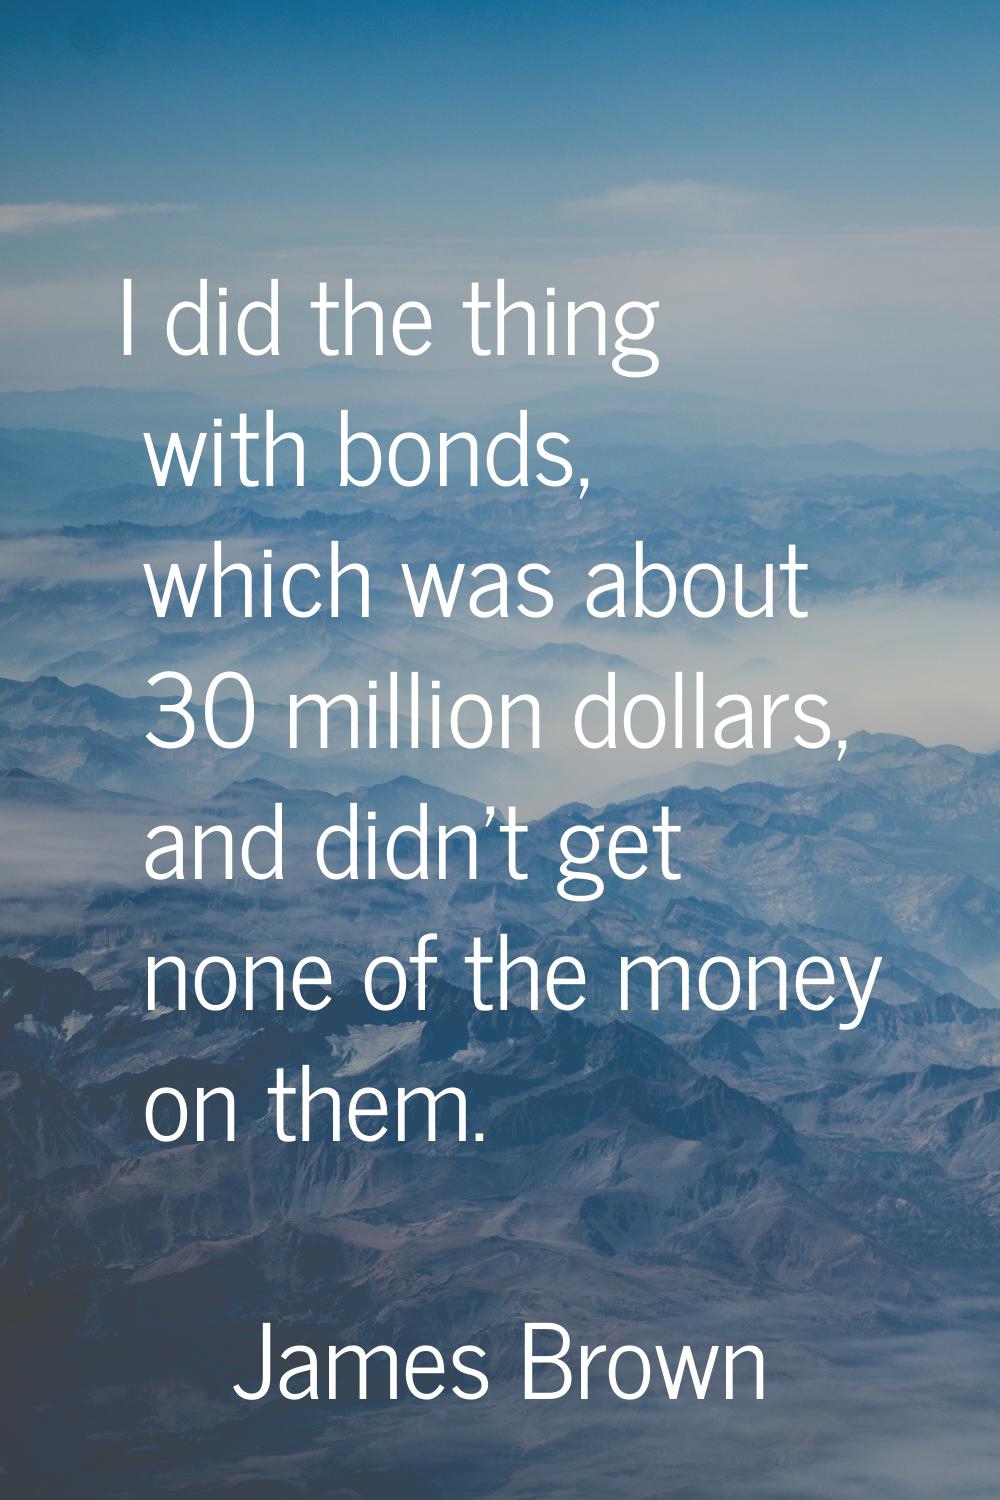 I did the thing with bonds, which was about 30 million dollars, and didn't get none of the money on